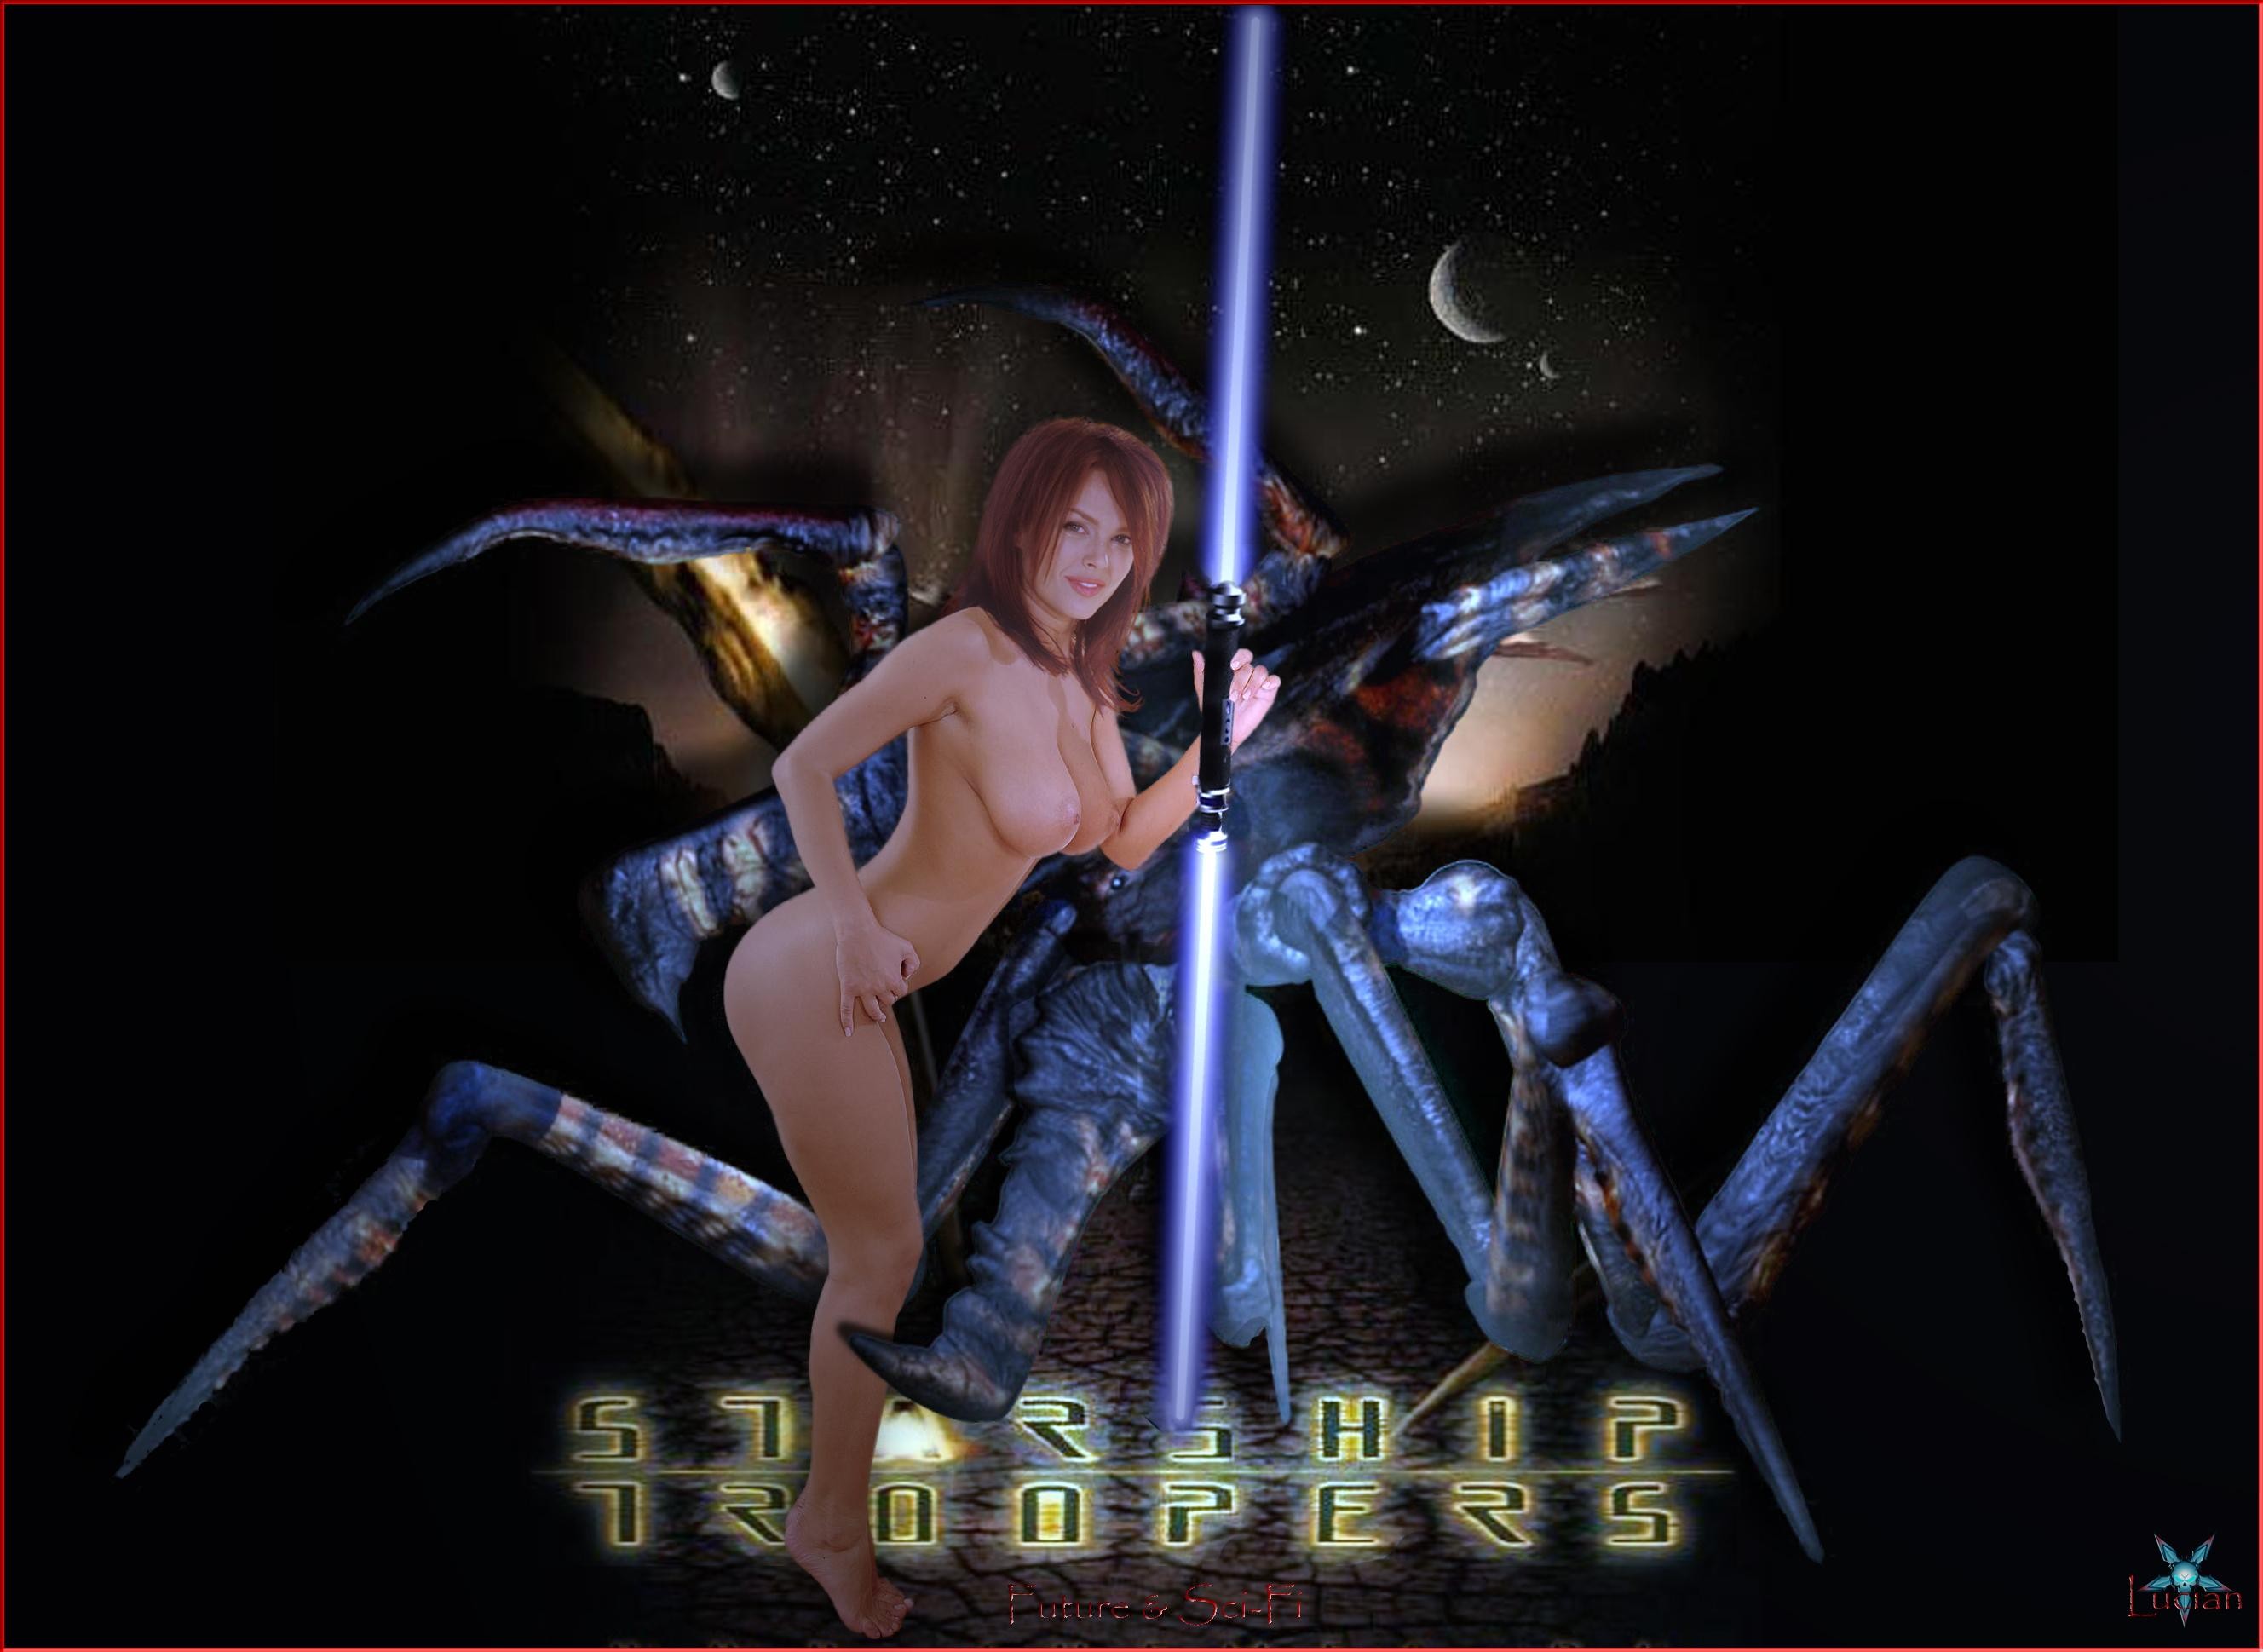 The Big ImageBoard (TBIB) - dina meyer dizzy flores fakes starship troopers tagme 2746918.